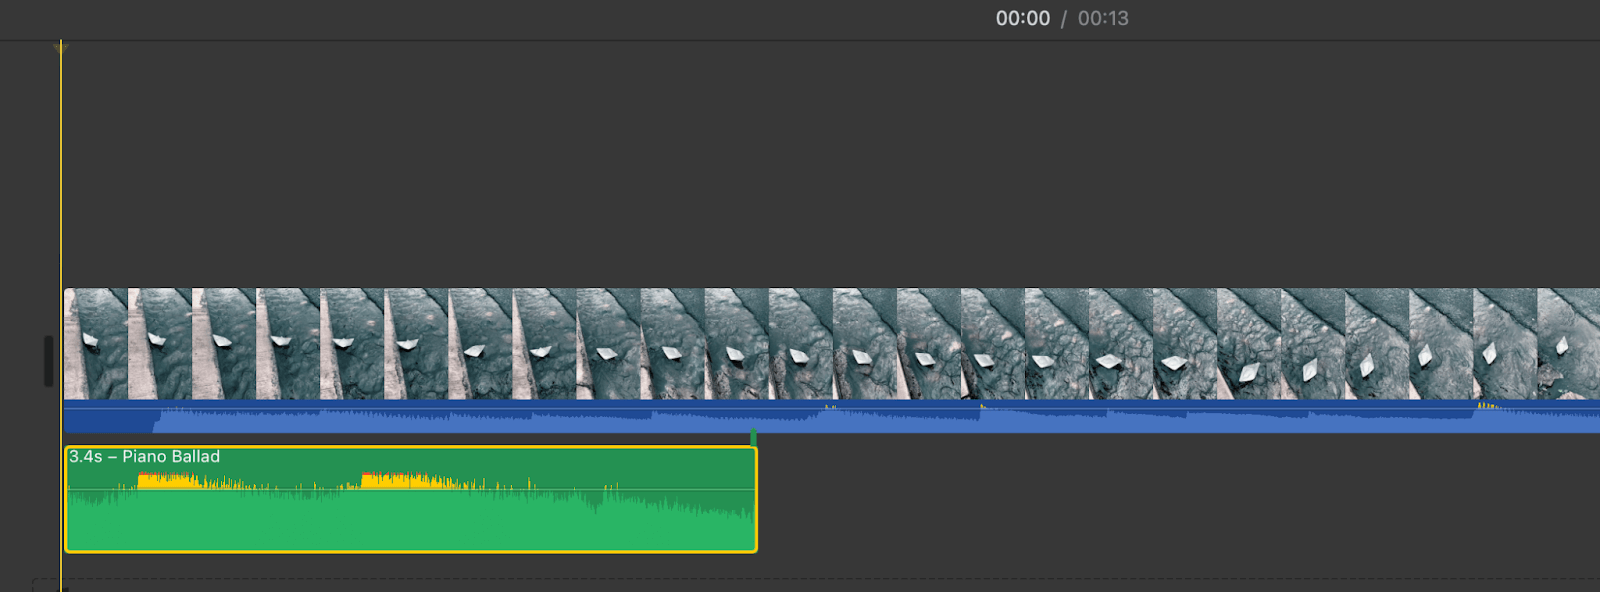 Adding music to a video timeline.